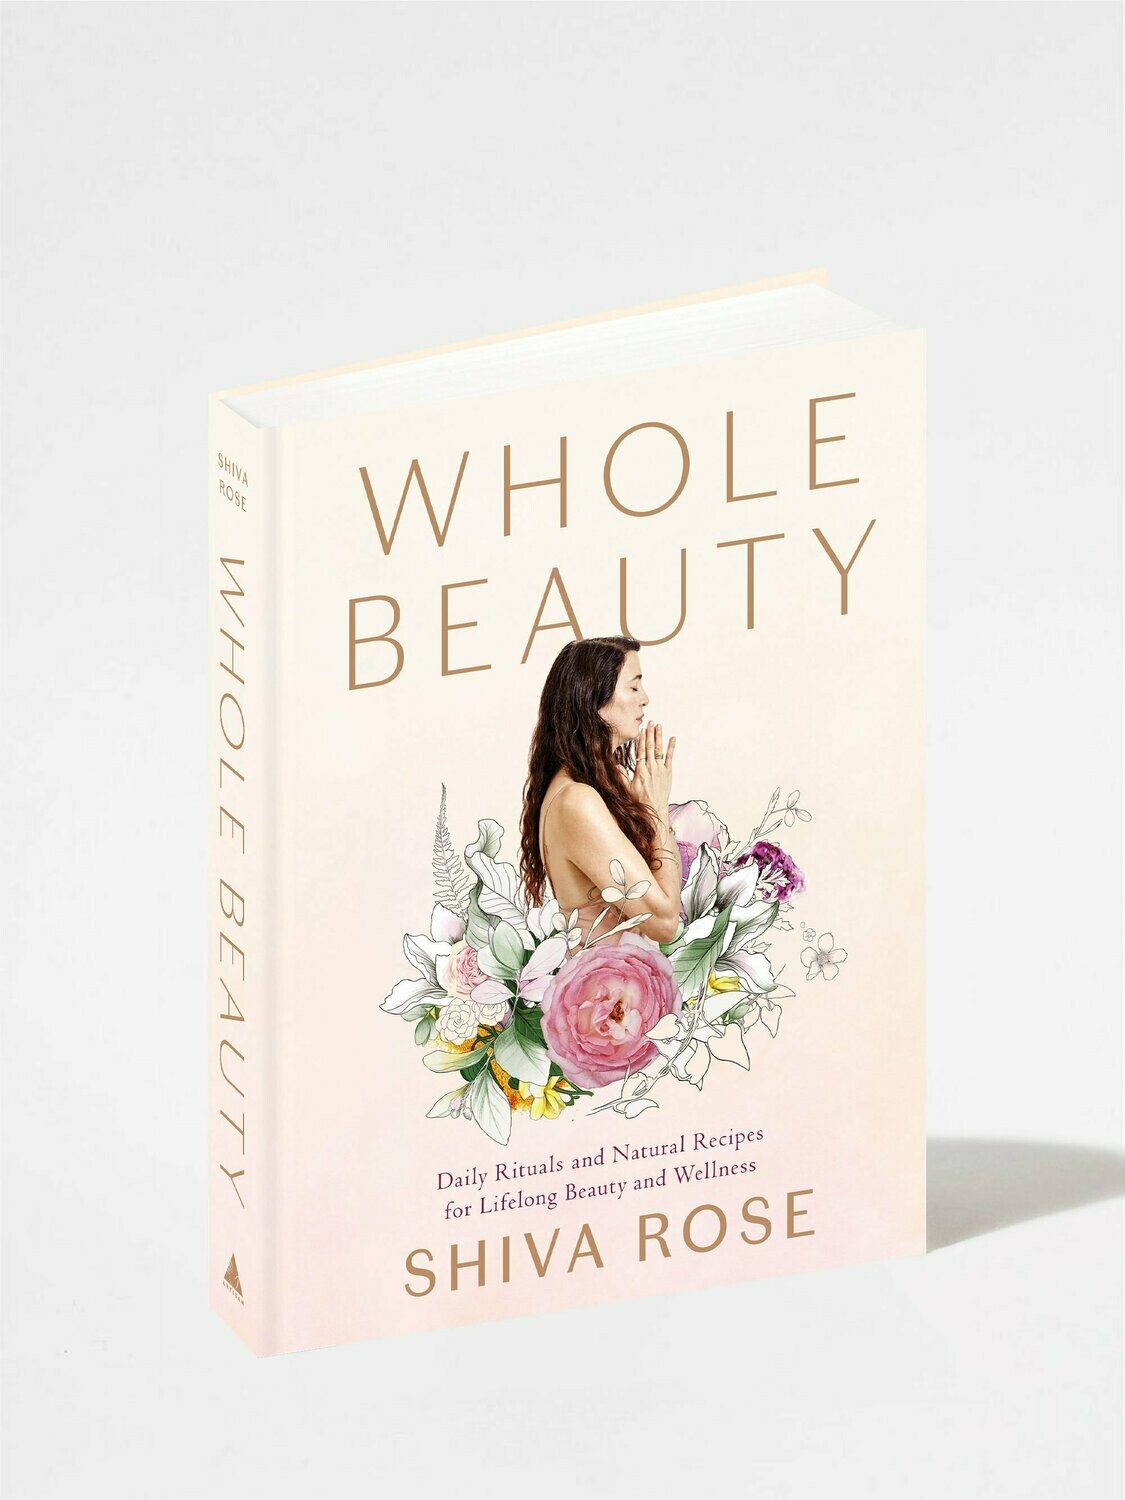 Whole Beauty : Daily Rituals and Natural Recipes for Lifelong Beauty and Wellness